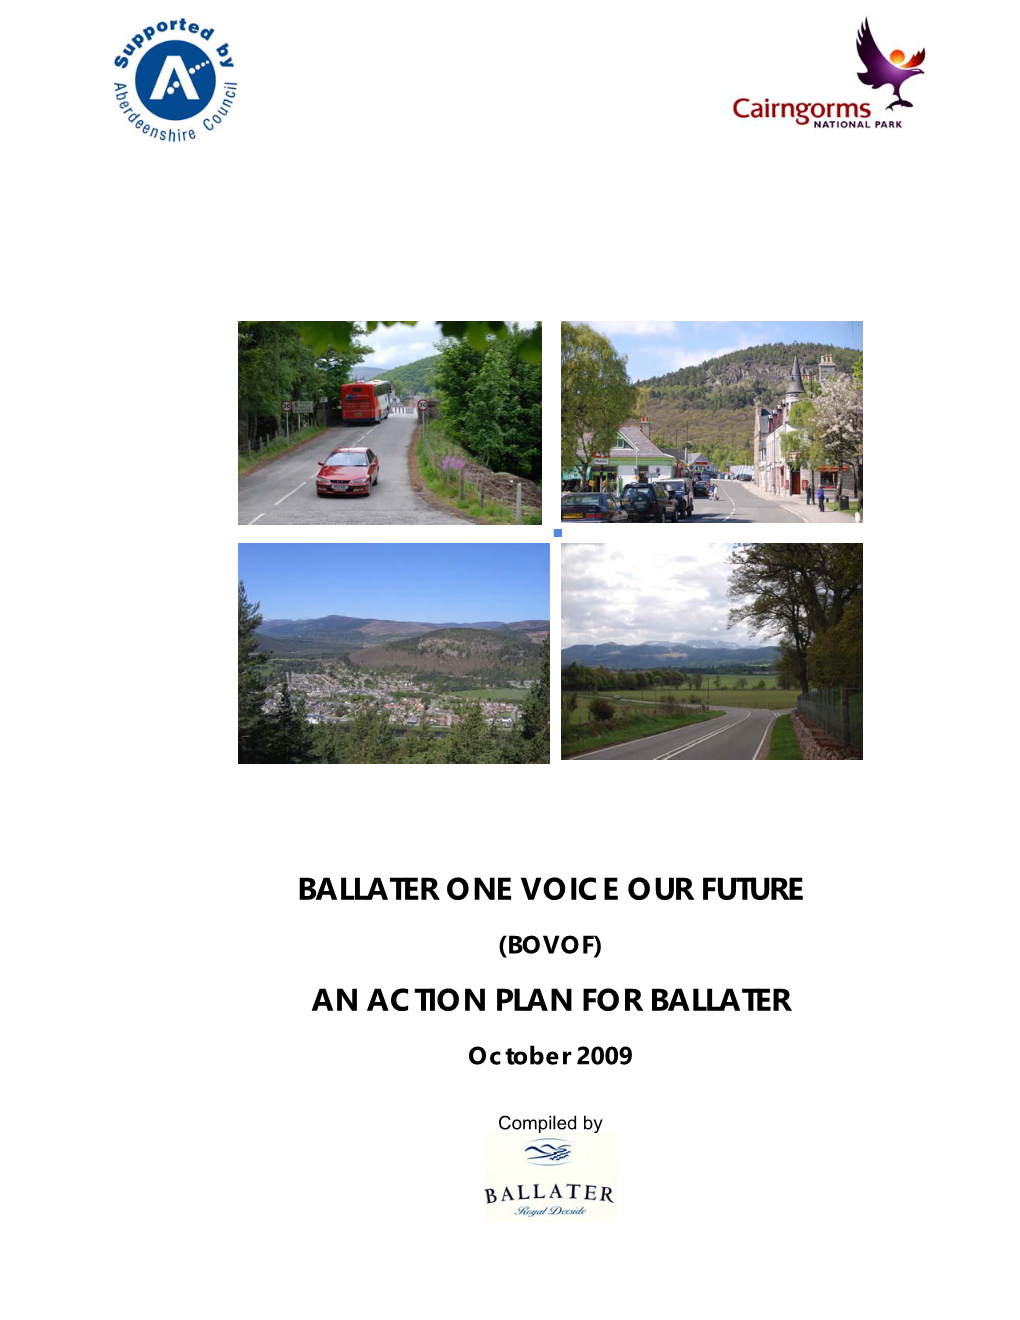 BALLATER ONE VOICE OUR FUTURE an Action Plan for Ballater October 2009